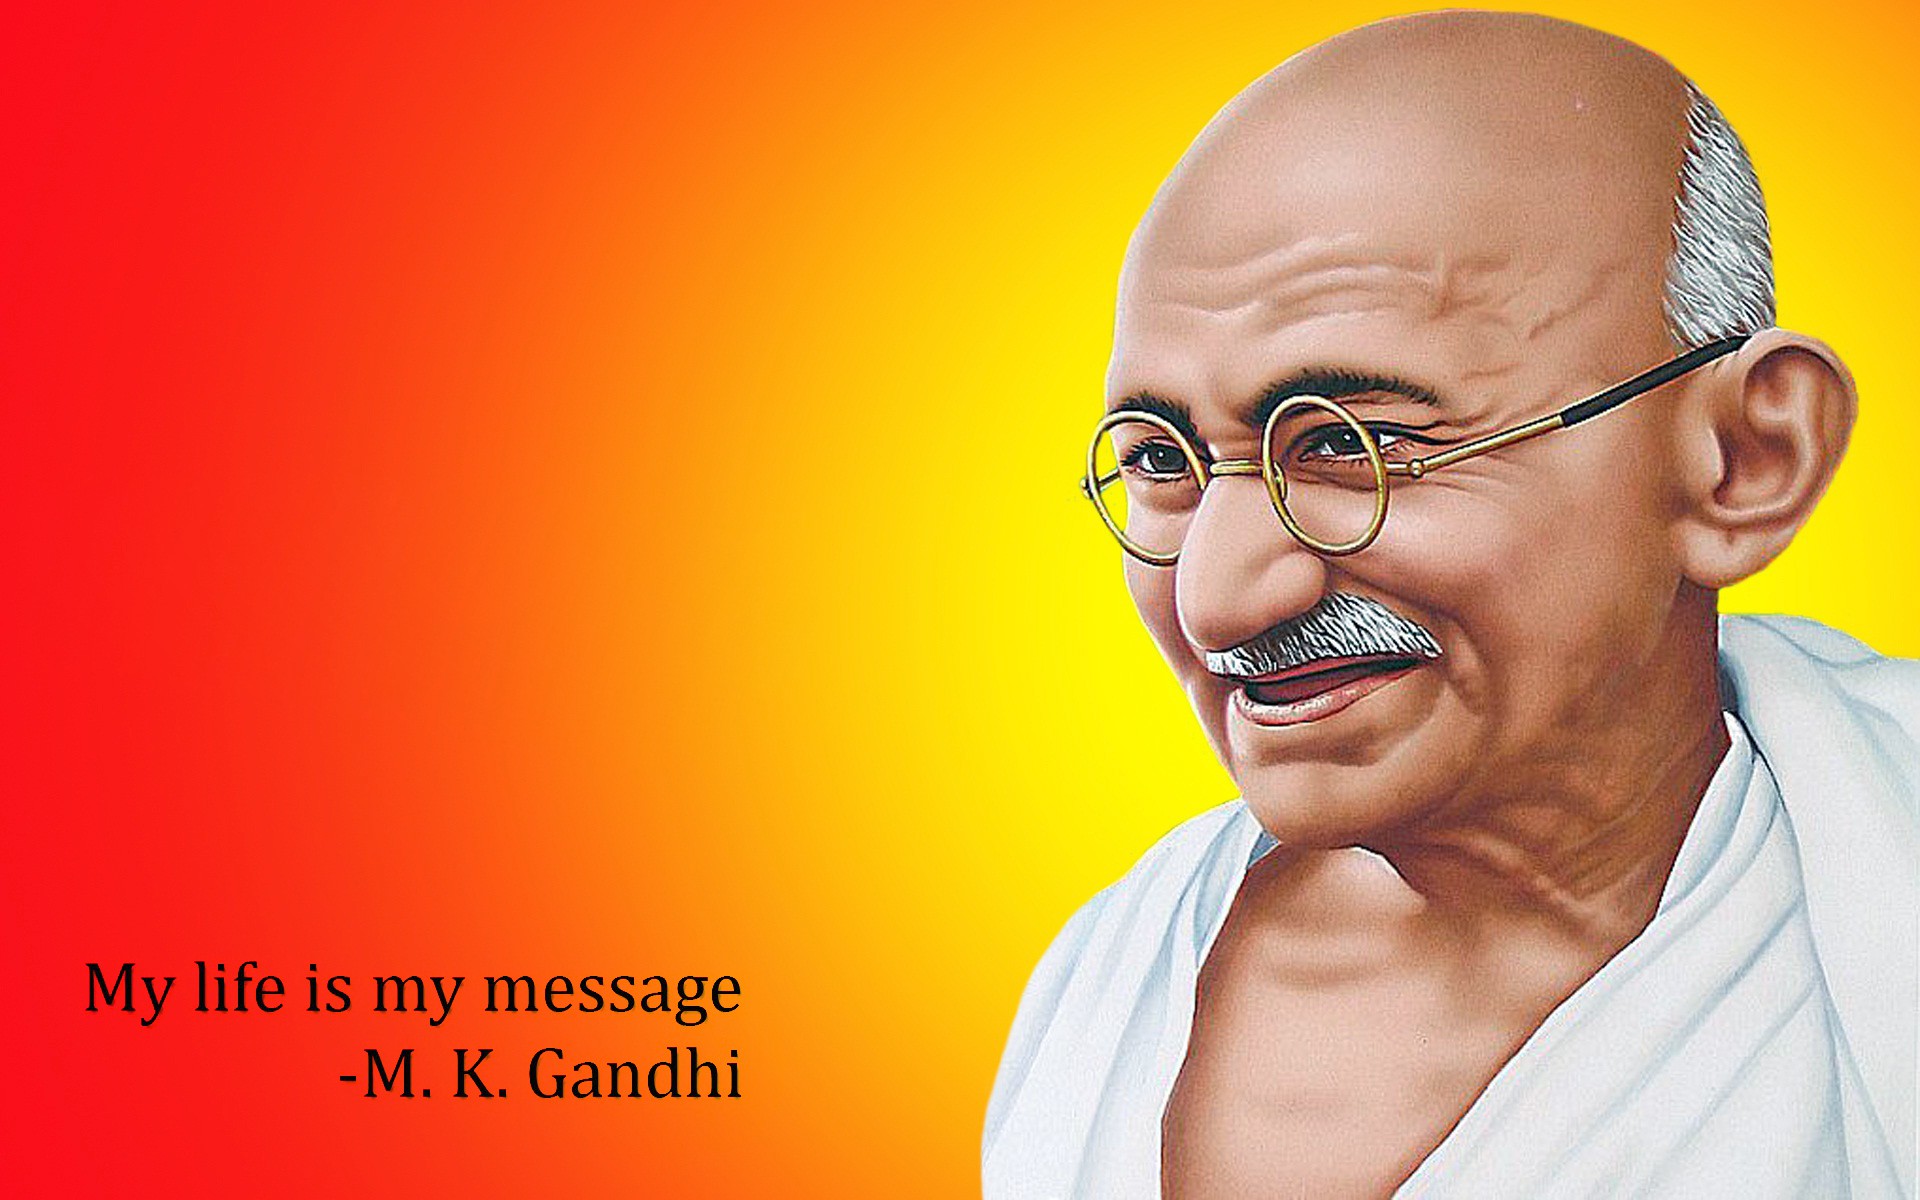 M K Gandhi Quotes Free Awesome Image For Mobile Download Hd Picture